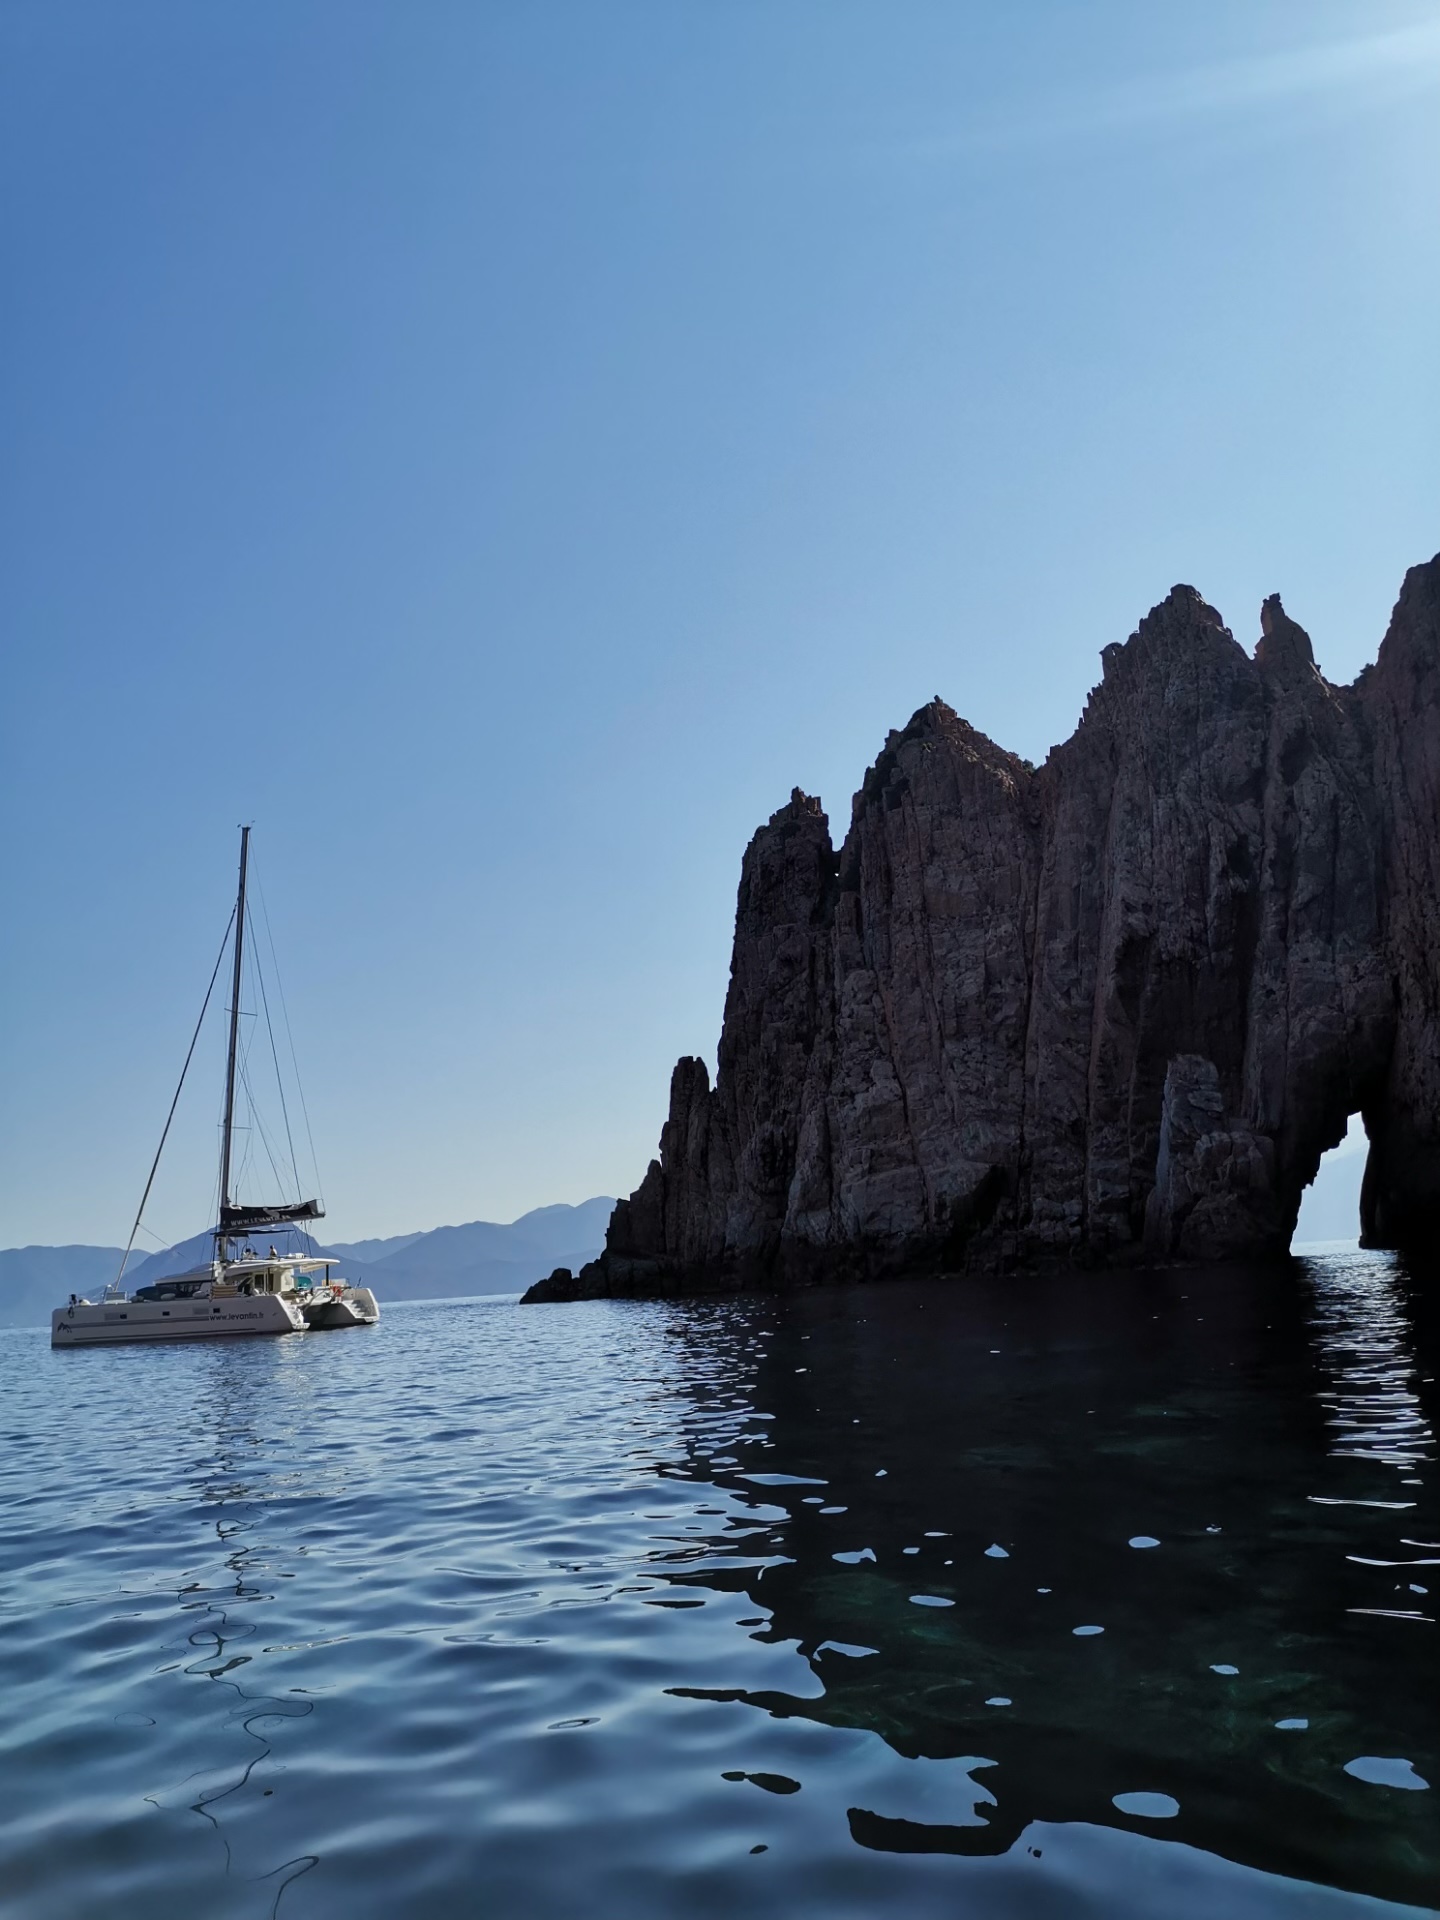 Lagoon 450 - Yacht Charter Marseille & Boat hire in France French Riviera Marseille Marseille Marina Vieux Port 4